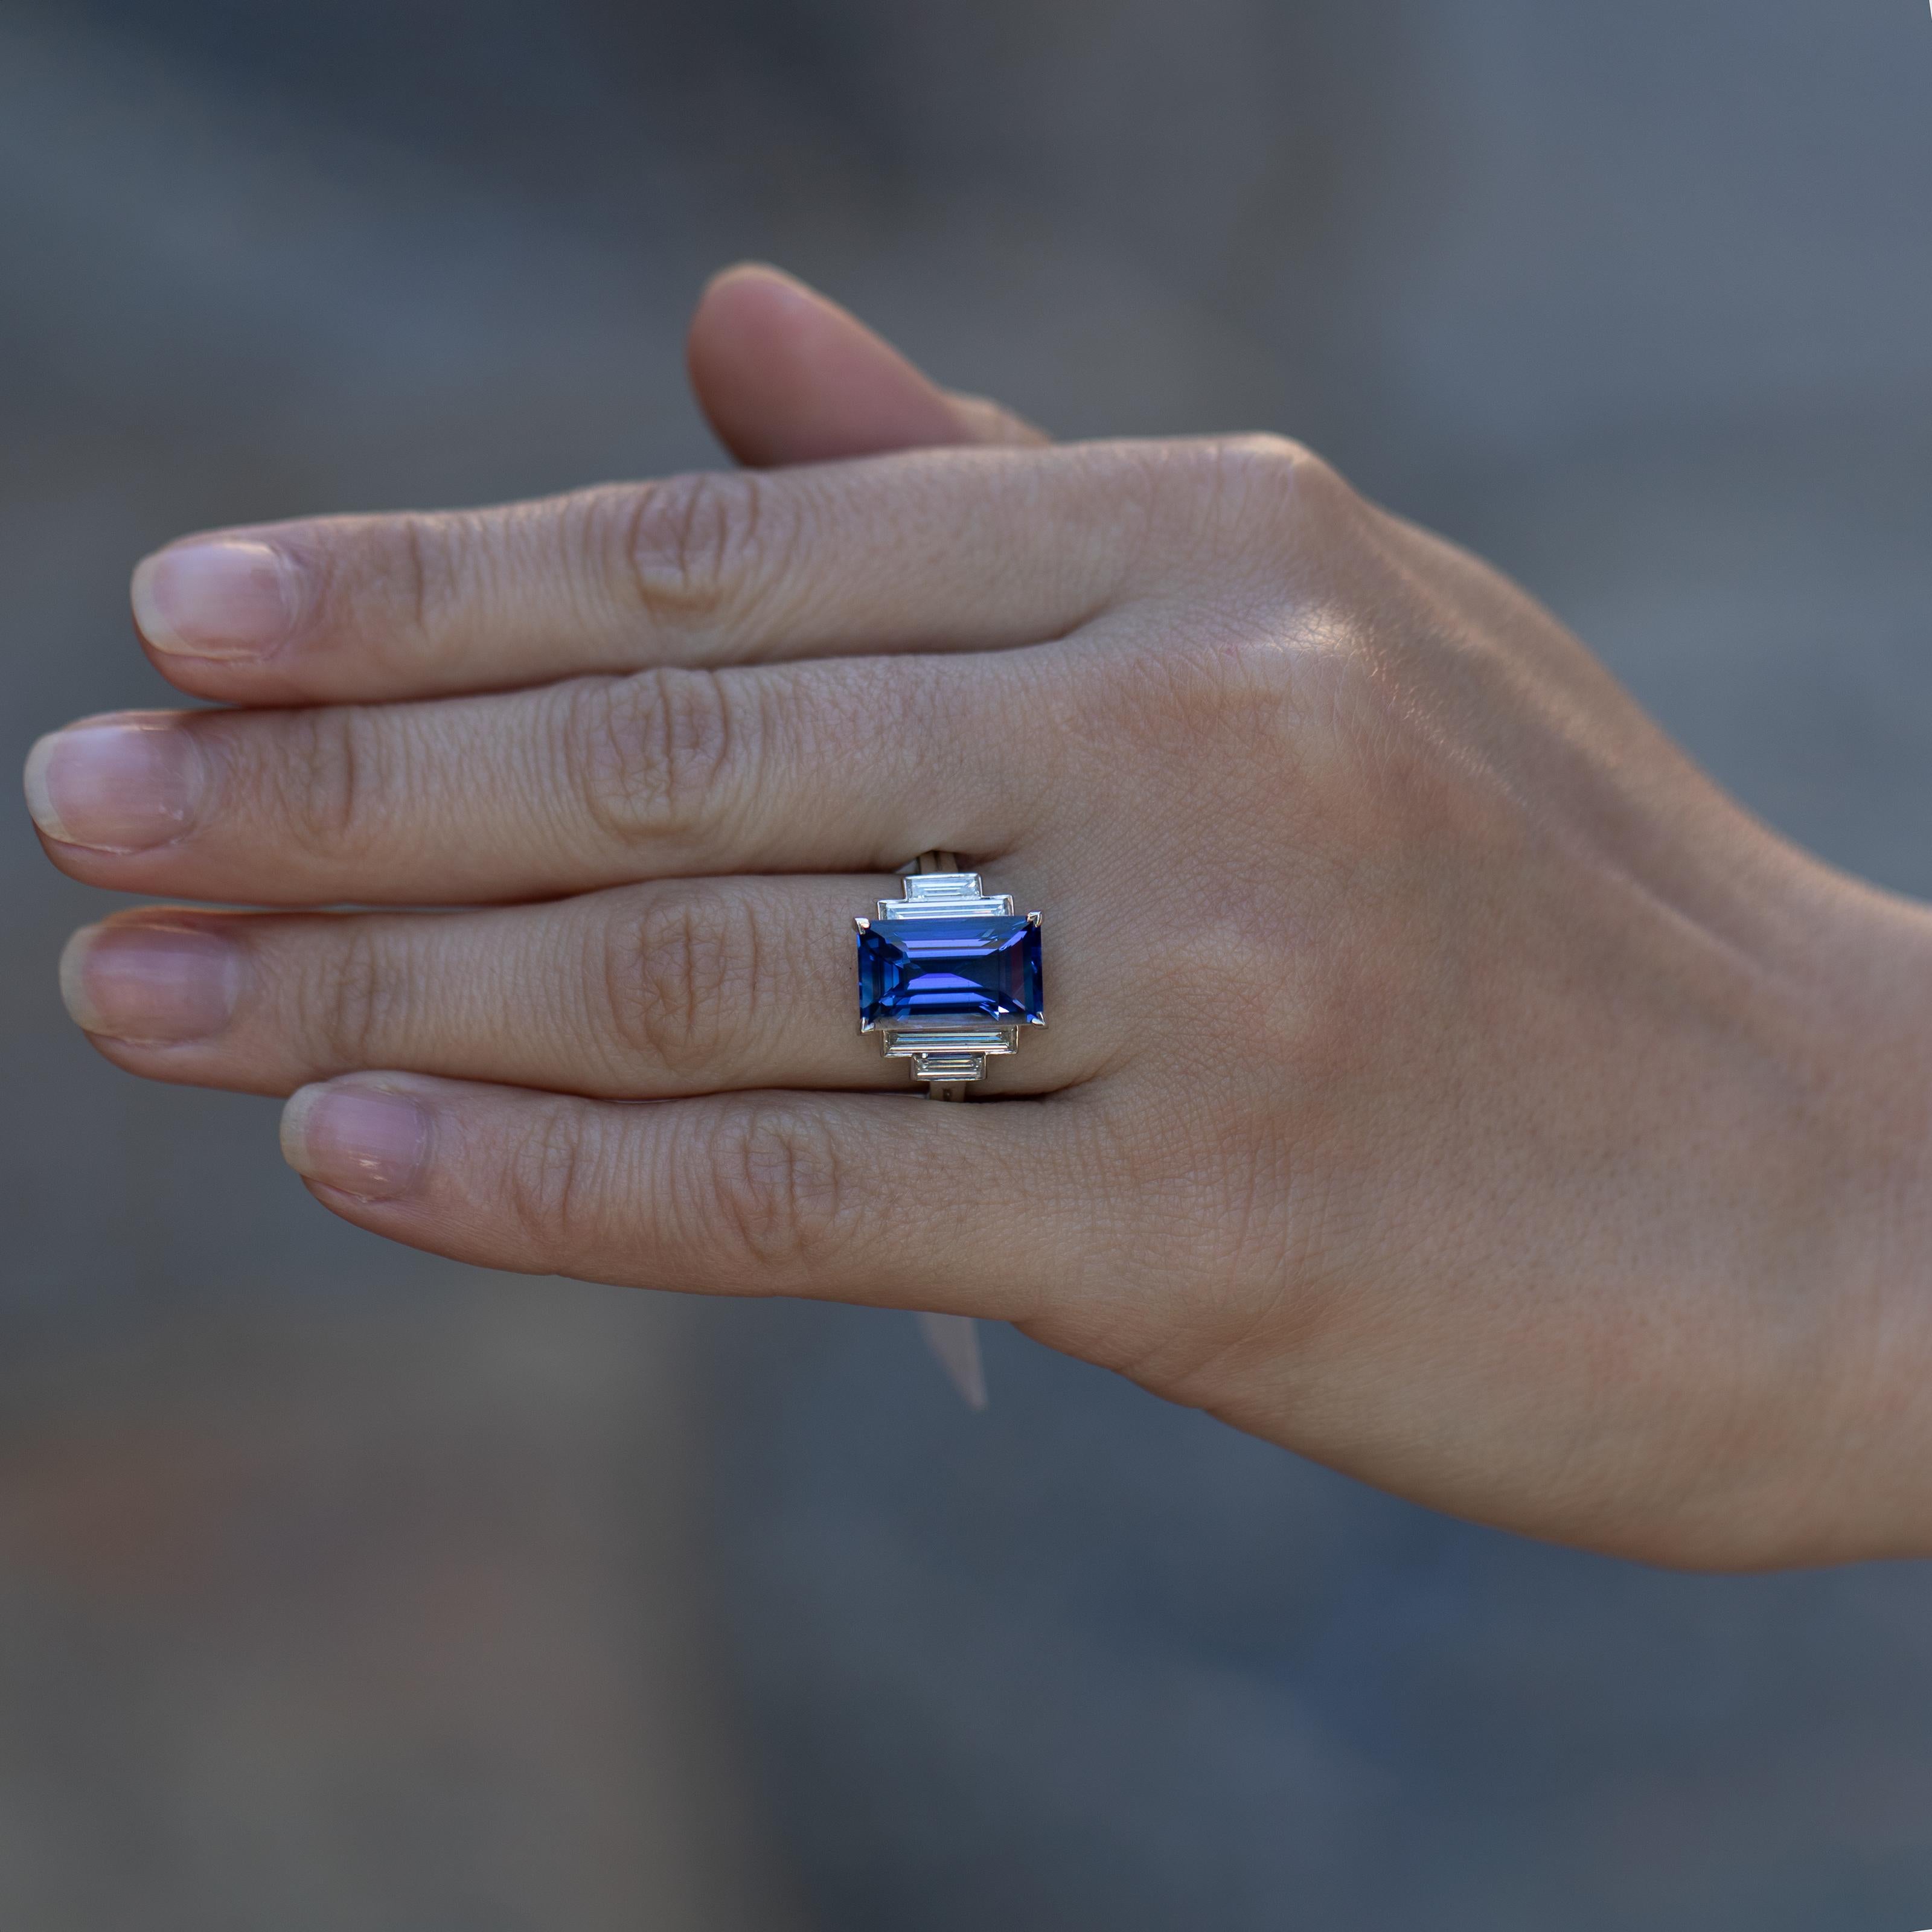 This is a once in a lifetime gemstone. I have been in the trade all of my life and this is by far the most beautiful sapphire I have ever laid my eyes on. It is so chique and bold. I love the long shape of the stone and the art deco design with the